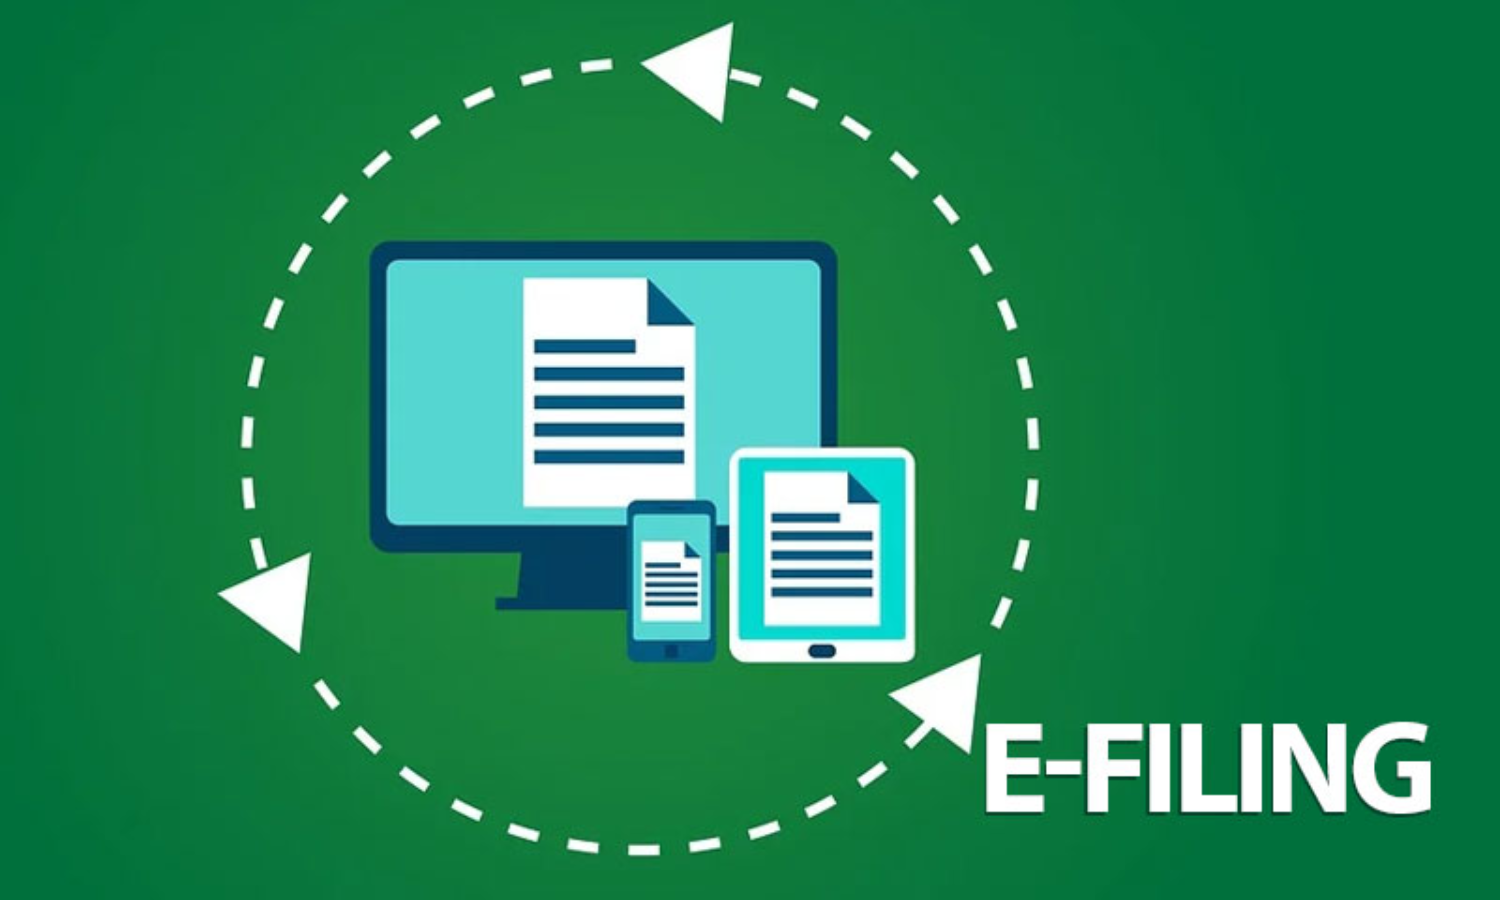 efile court documents anytime, anywhere